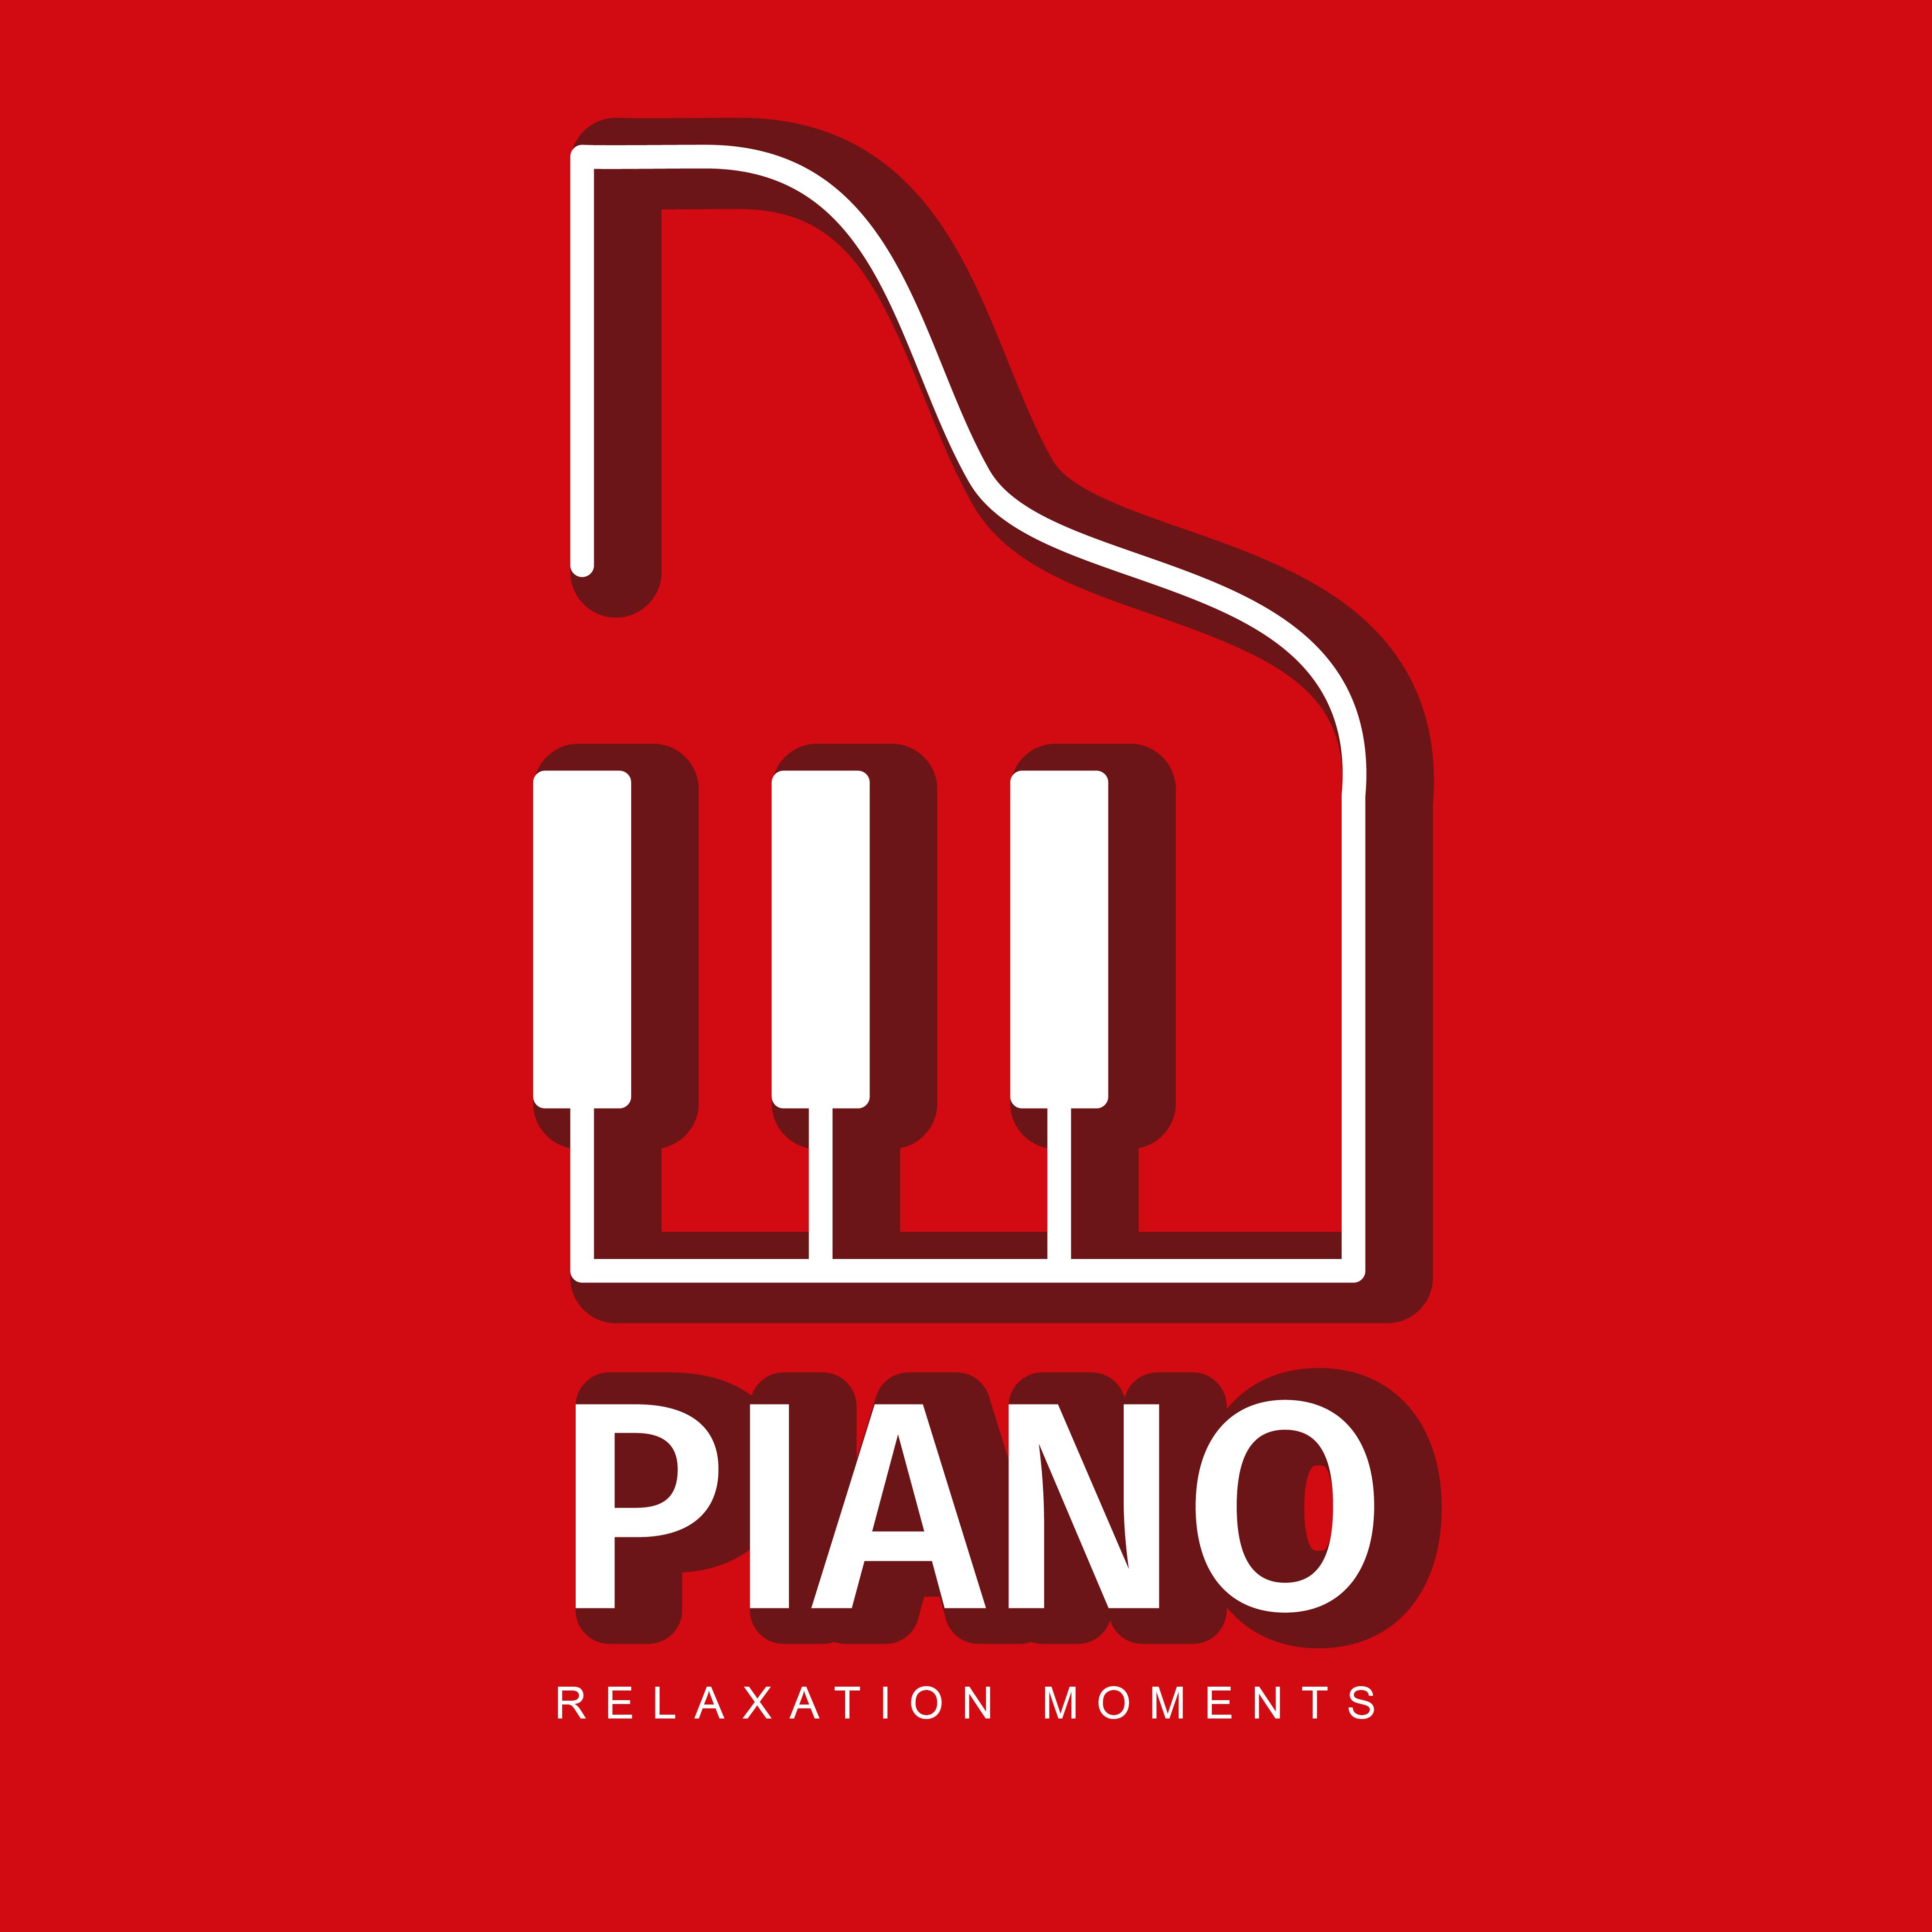 Piano Relaxation Moments: Piano Collection 2019, Jazz Music Ambient, Piano Music, Relax & Rest, Instrumental Sounds at Night, Mellow Jazz